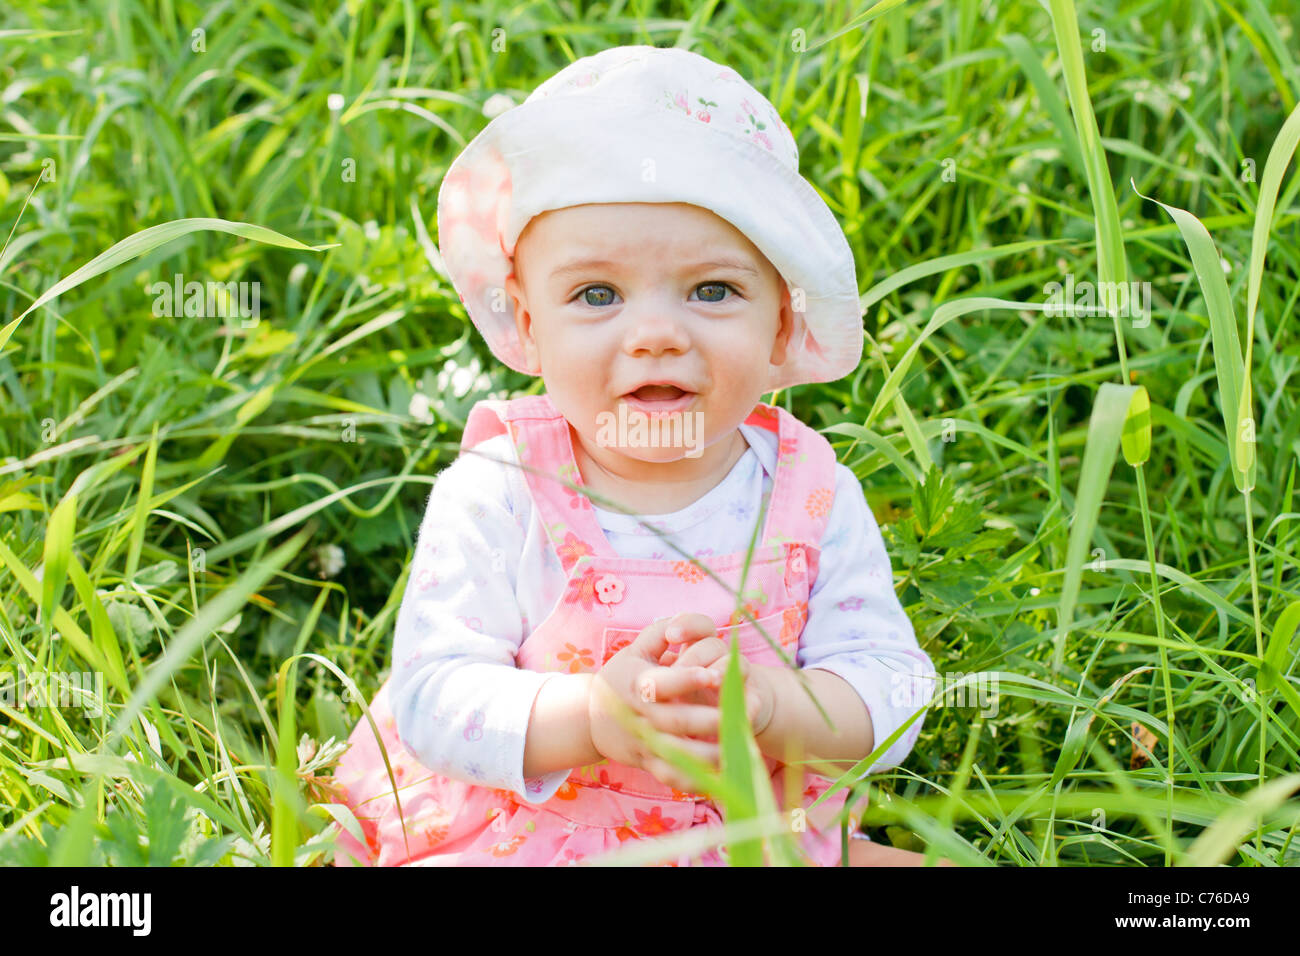 Happy baby girl with blue eyes lying on grass Stock Photo